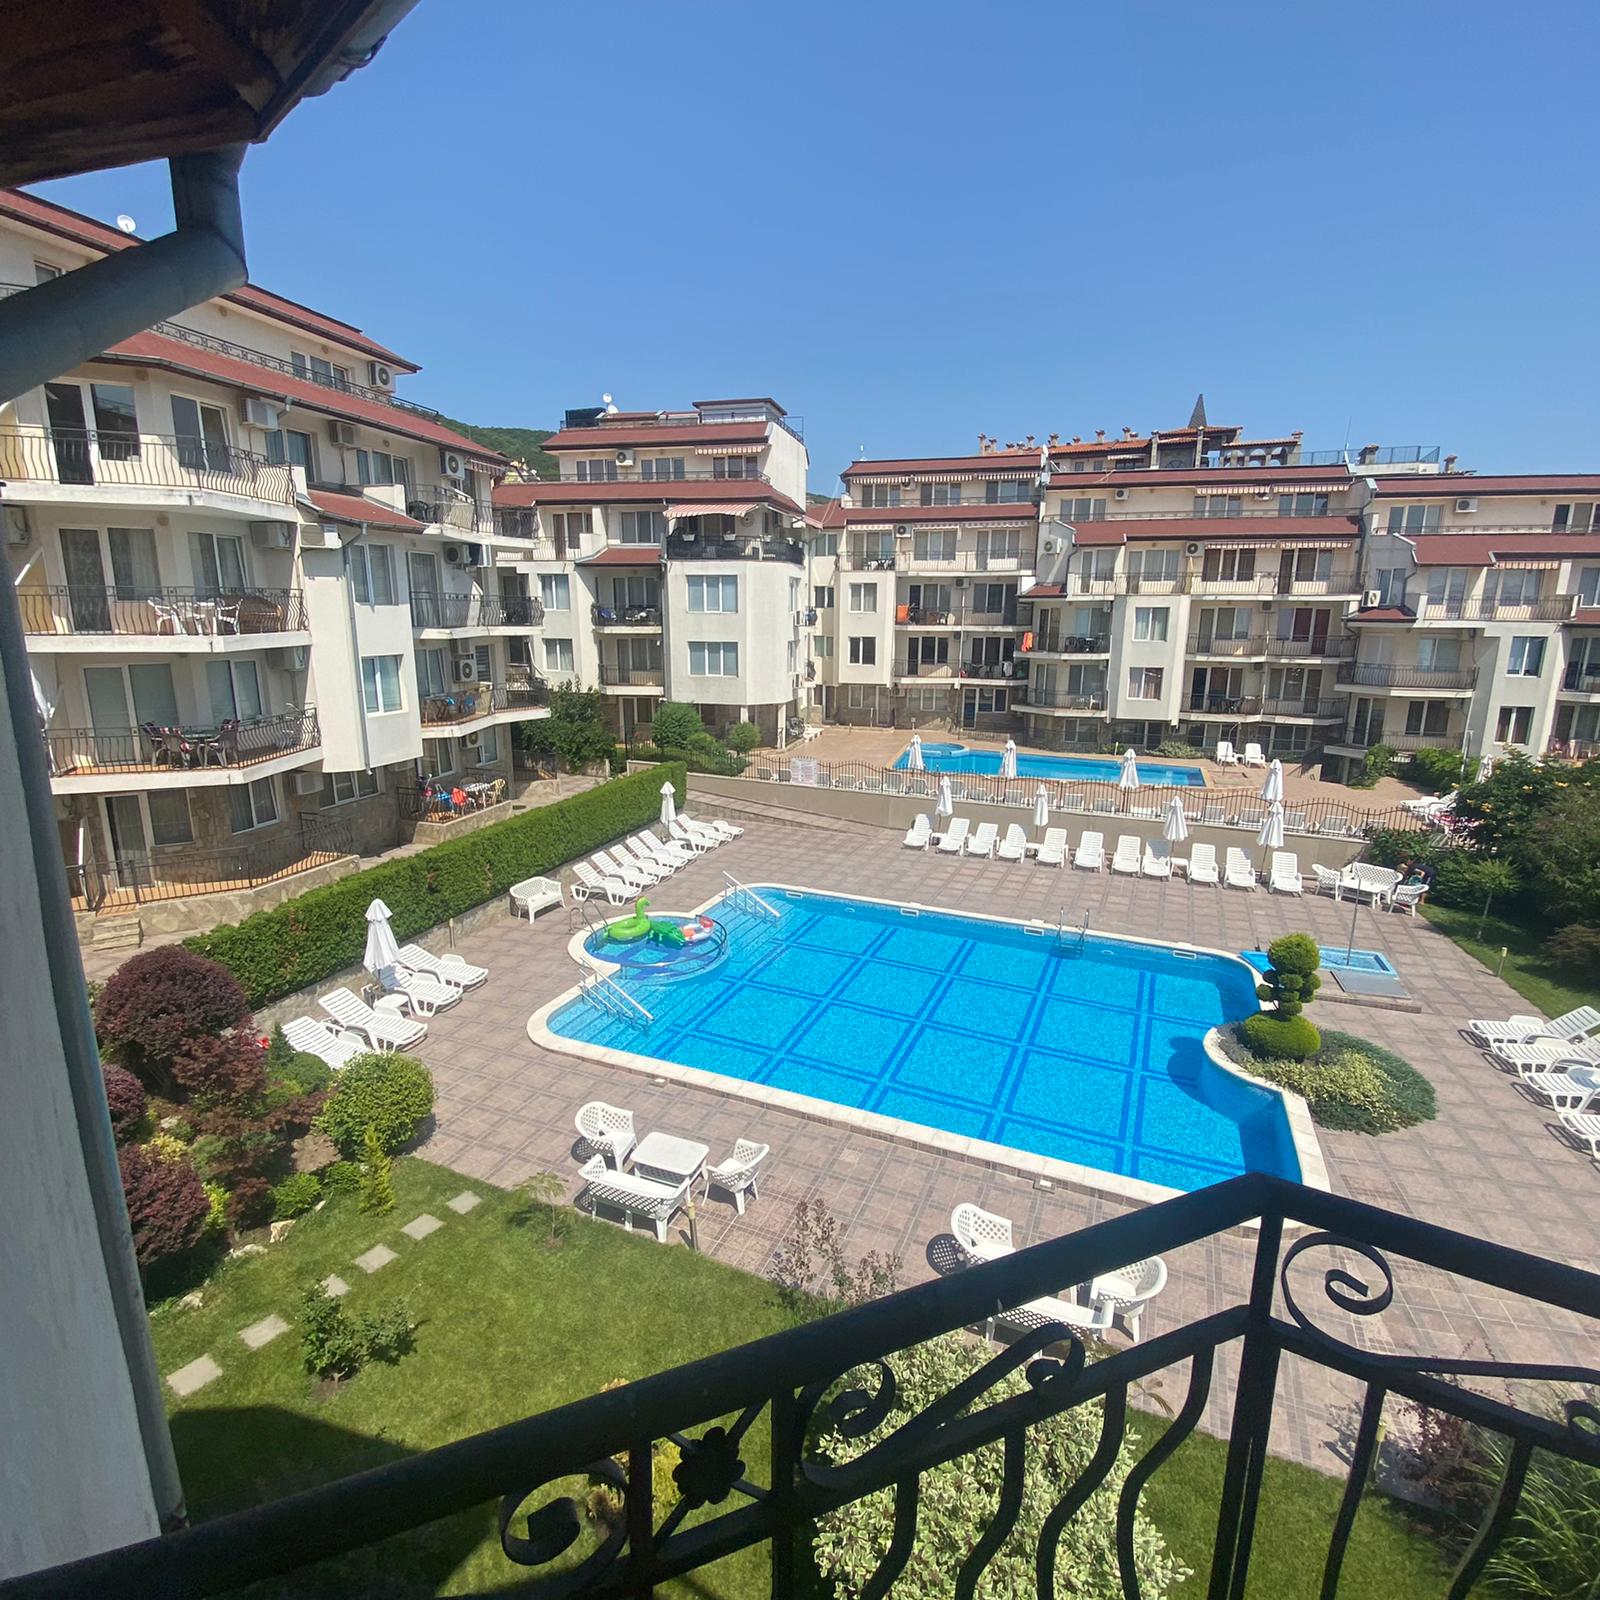 For Sale: Affordable apartment 250 meters from the beach in Saint Vlas.